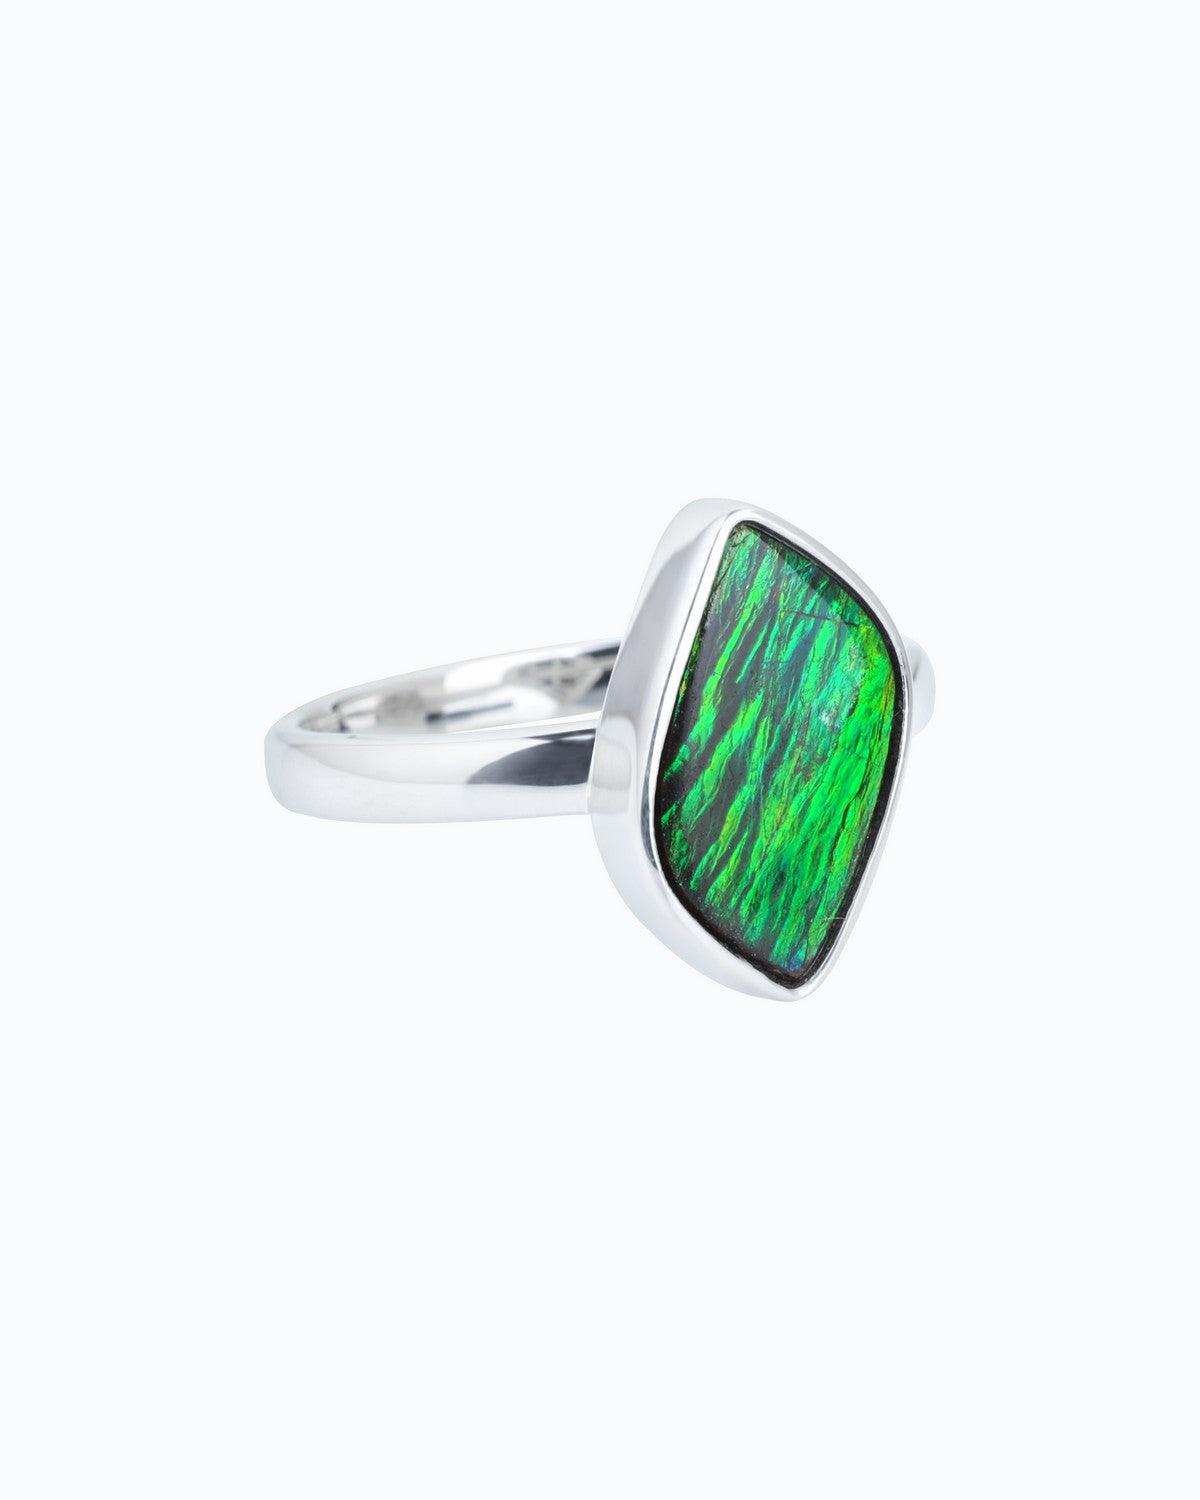 4.15 Ct. Ammolite Ring Solid 925 Sterling Silver Jewelry - YoTreasure